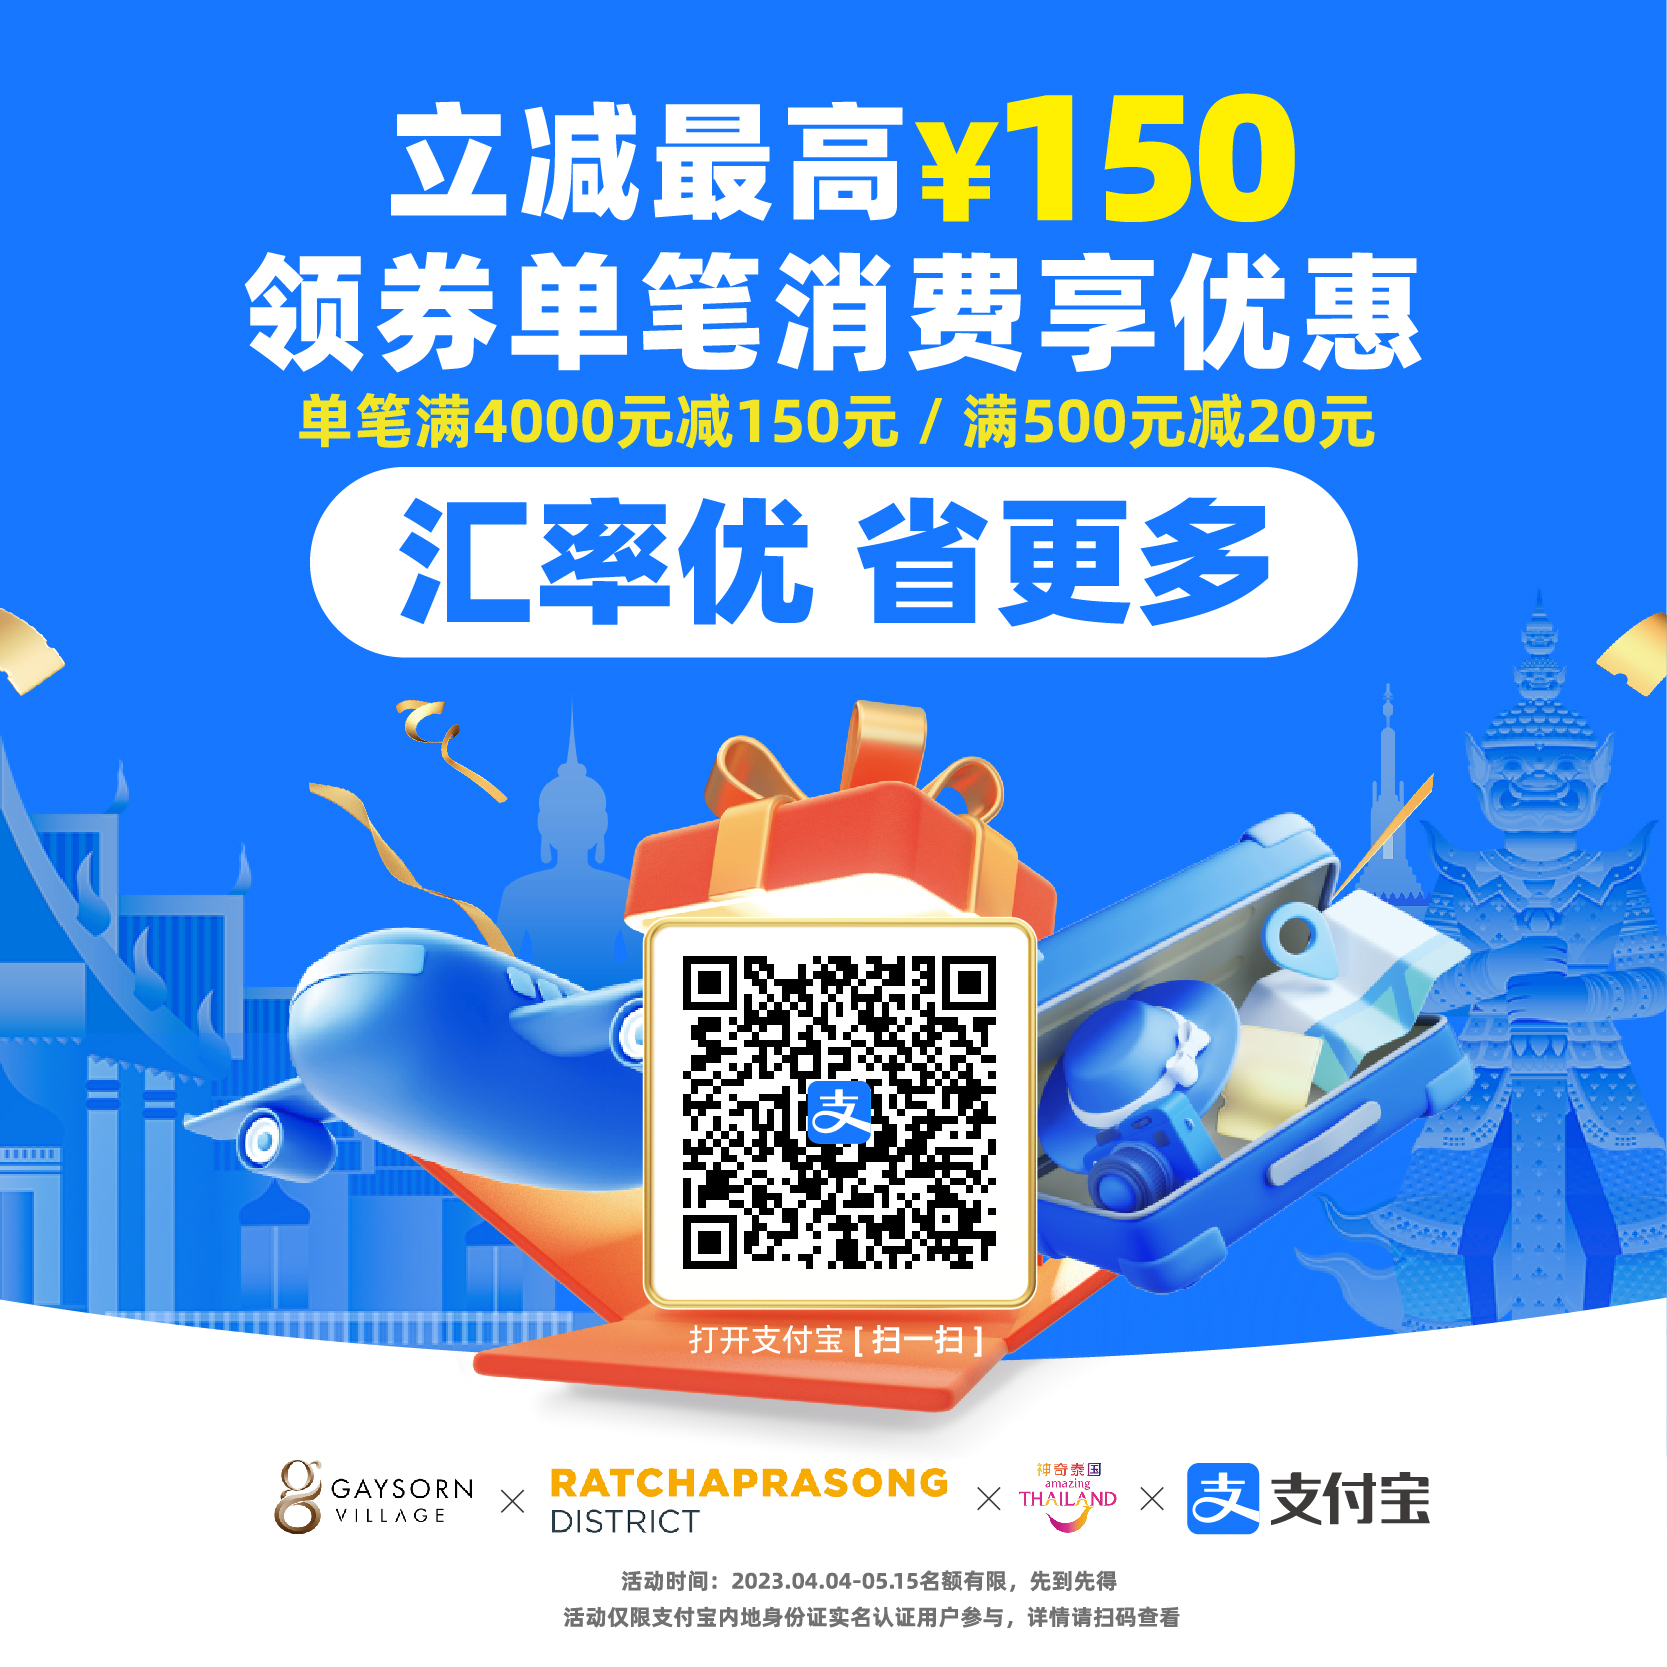 Exclusive Privileges for Alipay Users during Songkran 2023 !